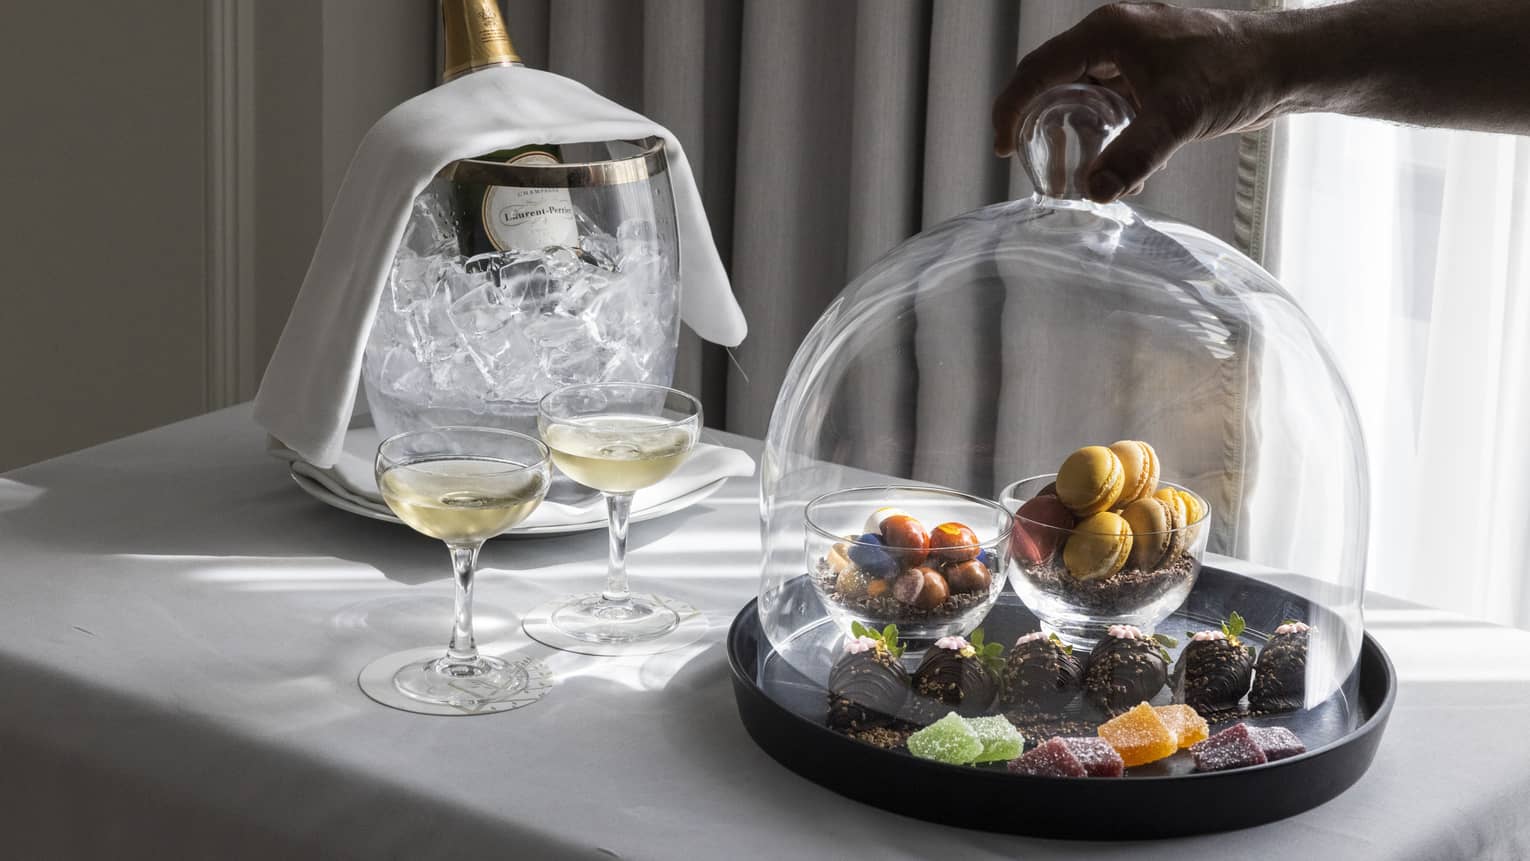 Sweets under a glass dome next to wine.